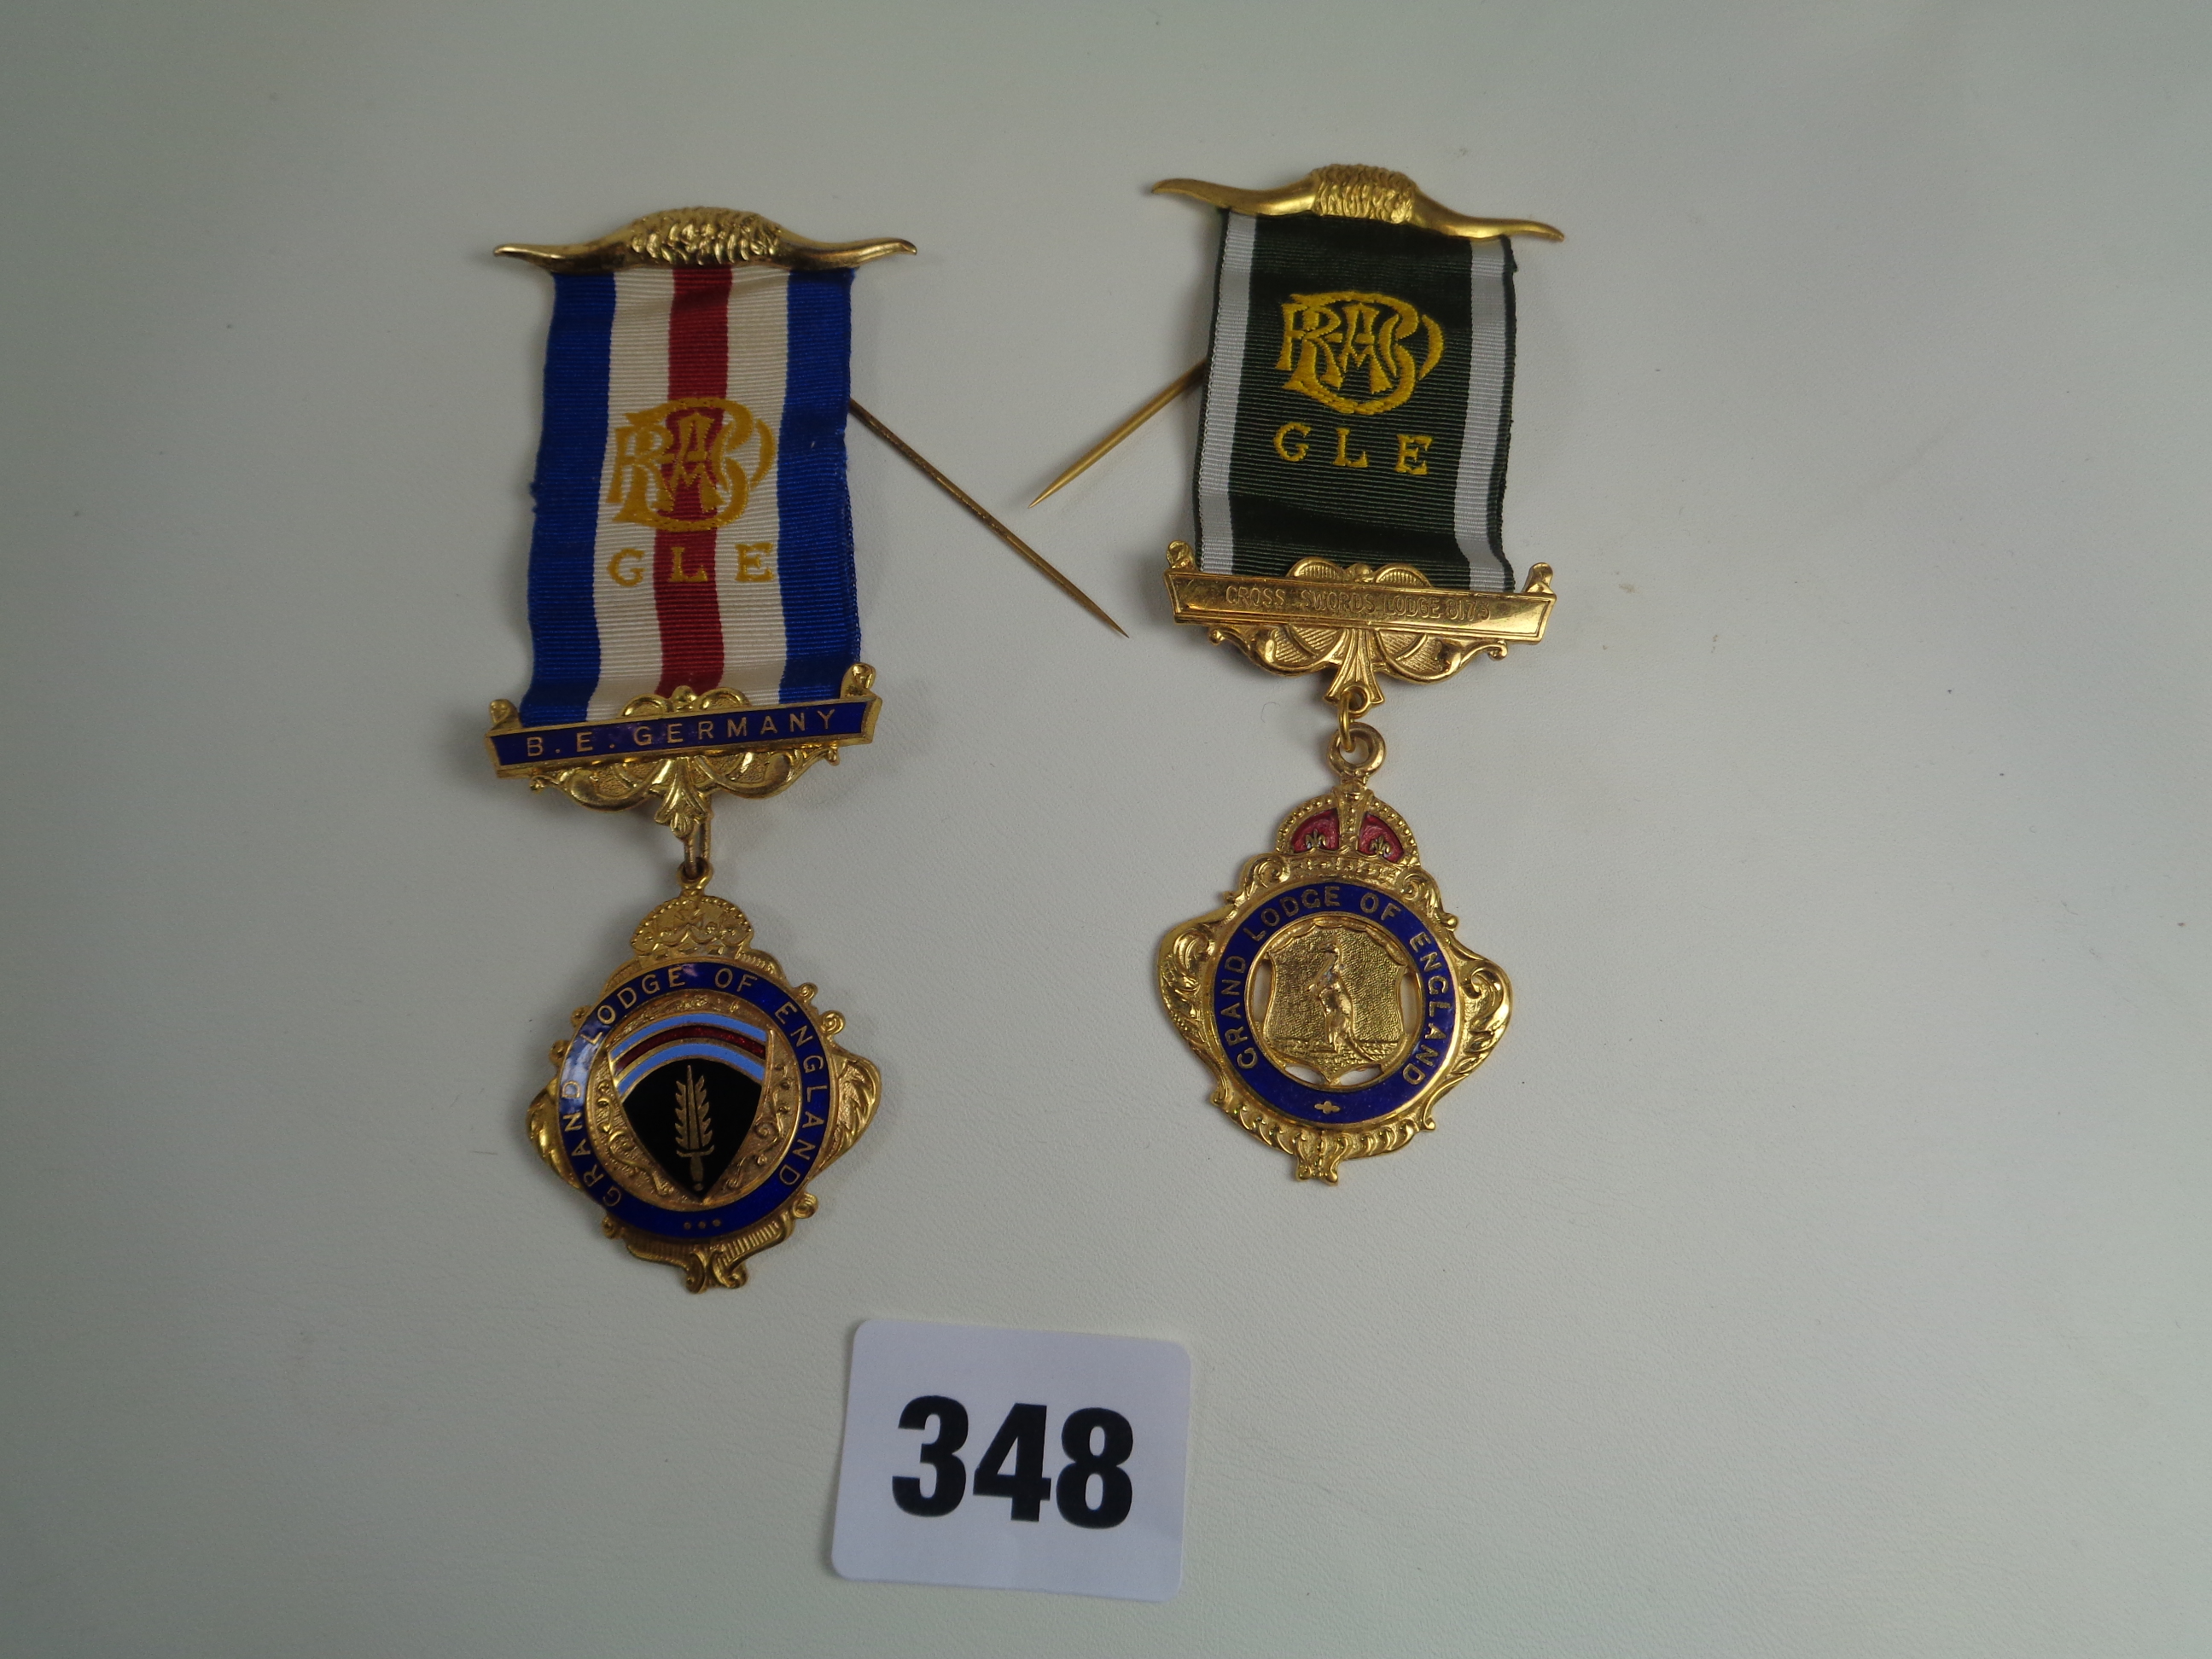 2 Gilt Grand Lodge of England medallions with ribbons